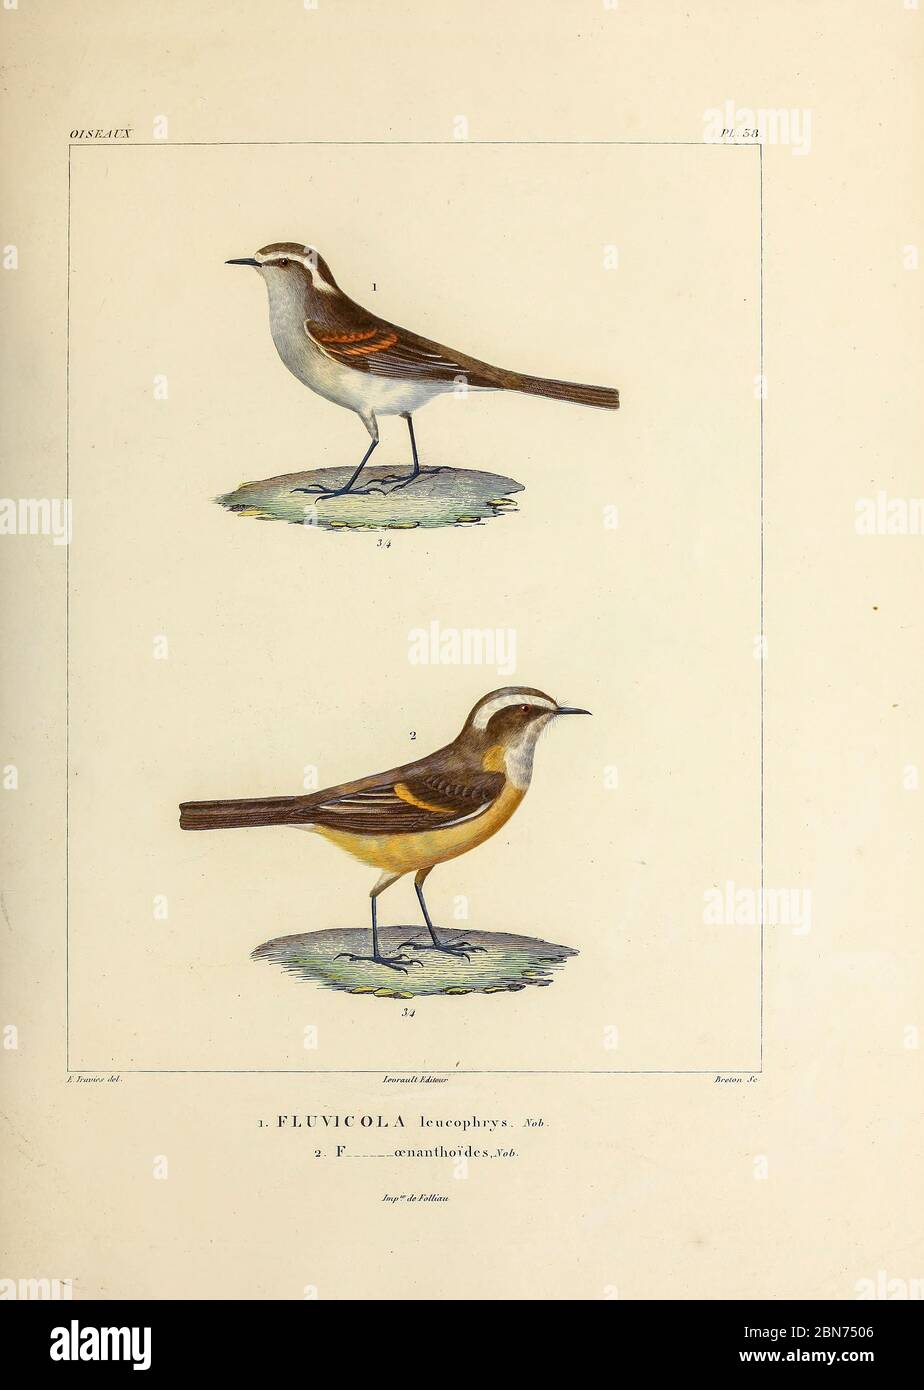 hand coloured sketch Top: white-browed chat-tyrant (Ochthoeca leucophrys [Here as Fluvicola leucophrys]) Bottom: D'Orbigny's chat-tyrant (Ochthoeca oenanthoides [Here as Fluvicola oenanthoides]) From the book 'Voyage dans l'Amérique Méridionale' [Journey to South America: (Brazil, the eastern republic of Uruguay, the Argentine Republic, Patagonia, the republic of Chile, the republic of Bolivia, the republic of Peru), executed during the years 1826 - 1833] 4th volume Part 3 By: Orbigny, Alcide Dessalines d', d'Orbigny, 1802-1857; Montagne, Jean François Camille, 1784-1866; Martius, Karl Friedr Stock Photo